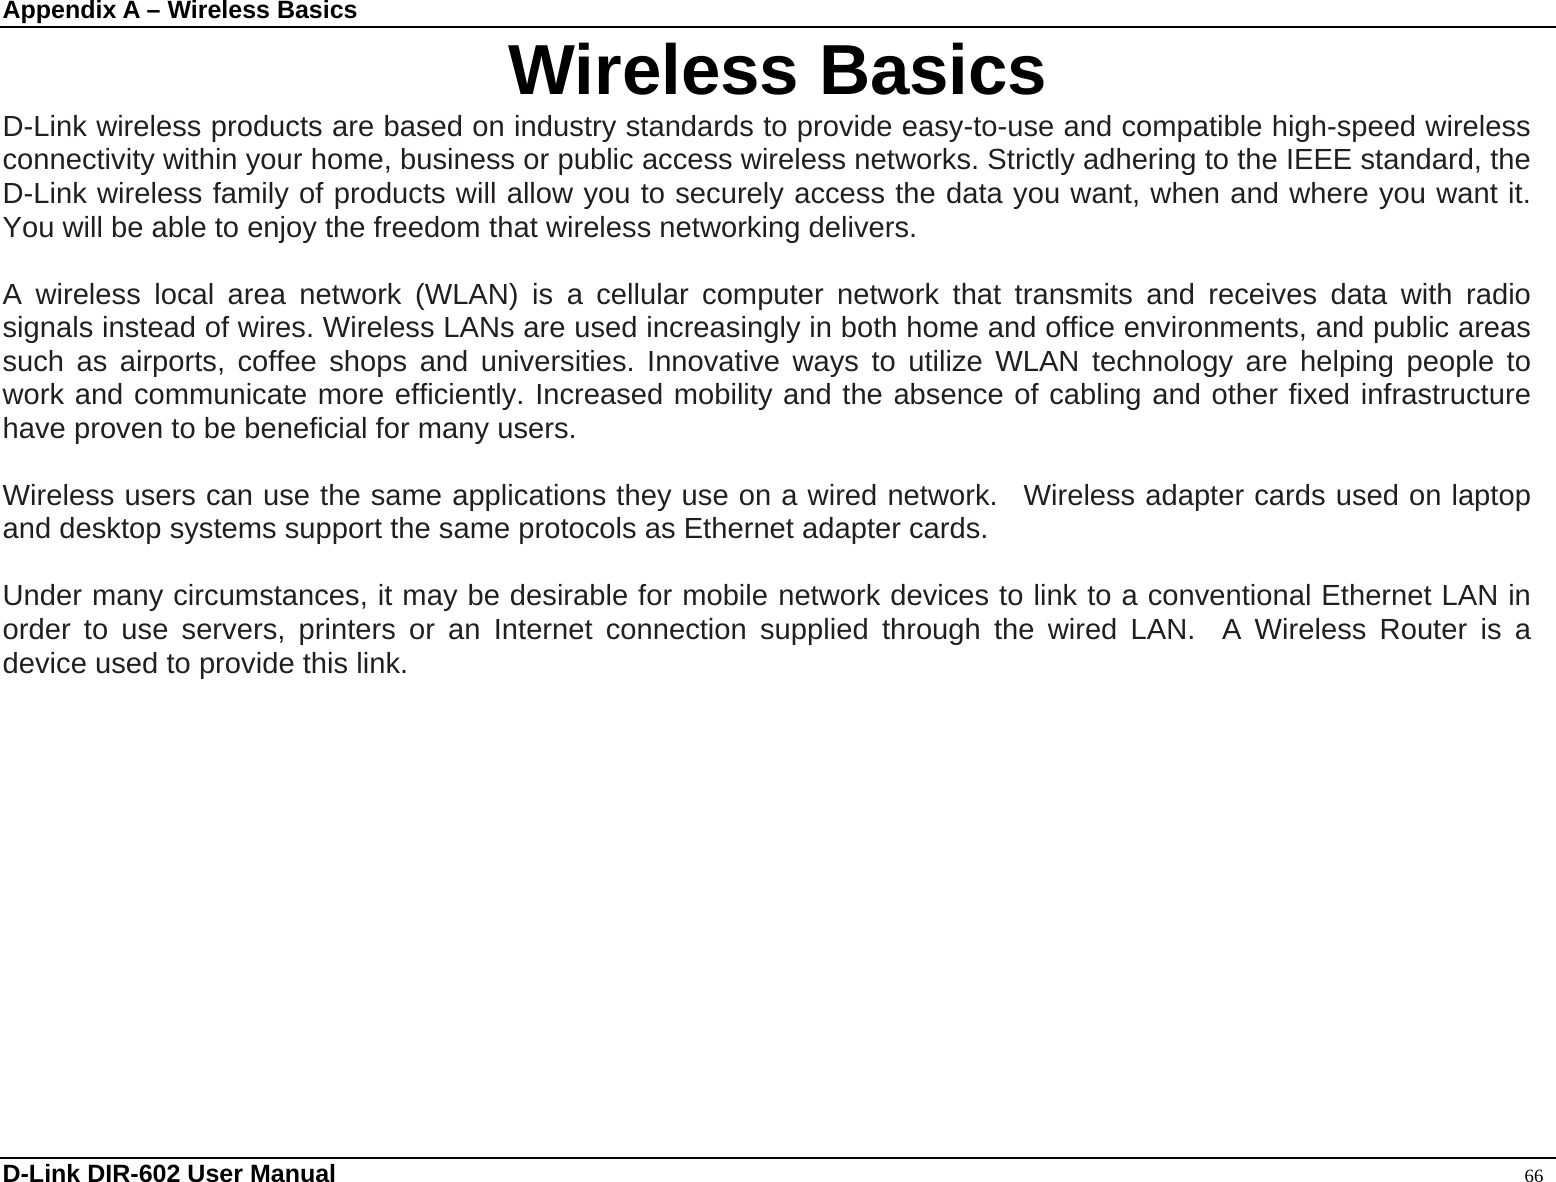 Appendix A – Wireless Basics  D-Link DIR-602 User Manual                                                                                               66 Wireless Basics D-Link wireless products are based on industry standards to provide easy-to-use and compatible high-speed wireless connectivity within your home, business or public access wireless networks. Strictly adhering to the IEEE standard, the D-Link wireless family of products will allow you to securely access the data you want, when and where you want it. You will be able to enjoy the freedom that wireless networking delivers.  A wireless local area network (WLAN) is a cellular computer network that transmits and receives data with radio signals instead of wires. Wireless LANs are used increasingly in both home and office environments, and public areas such as airports, coffee shops and universities. Innovative ways to utilize WLAN technology are helping people to work and communicate more efficiently. Increased mobility and the absence of cabling and other fixed infrastructure have proven to be beneficial for many users.    Wireless users can use the same applications they use on a wired network.  Wireless adapter cards used on laptop and desktop systems support the same protocols as Ethernet adapter cards.    Under many circumstances, it may be desirable for mobile network devices to link to a conventional Ethernet LAN in order to use servers, printers or an Internet connection supplied through the wired LAN.  A Wireless Router is a device used to provide this link.      